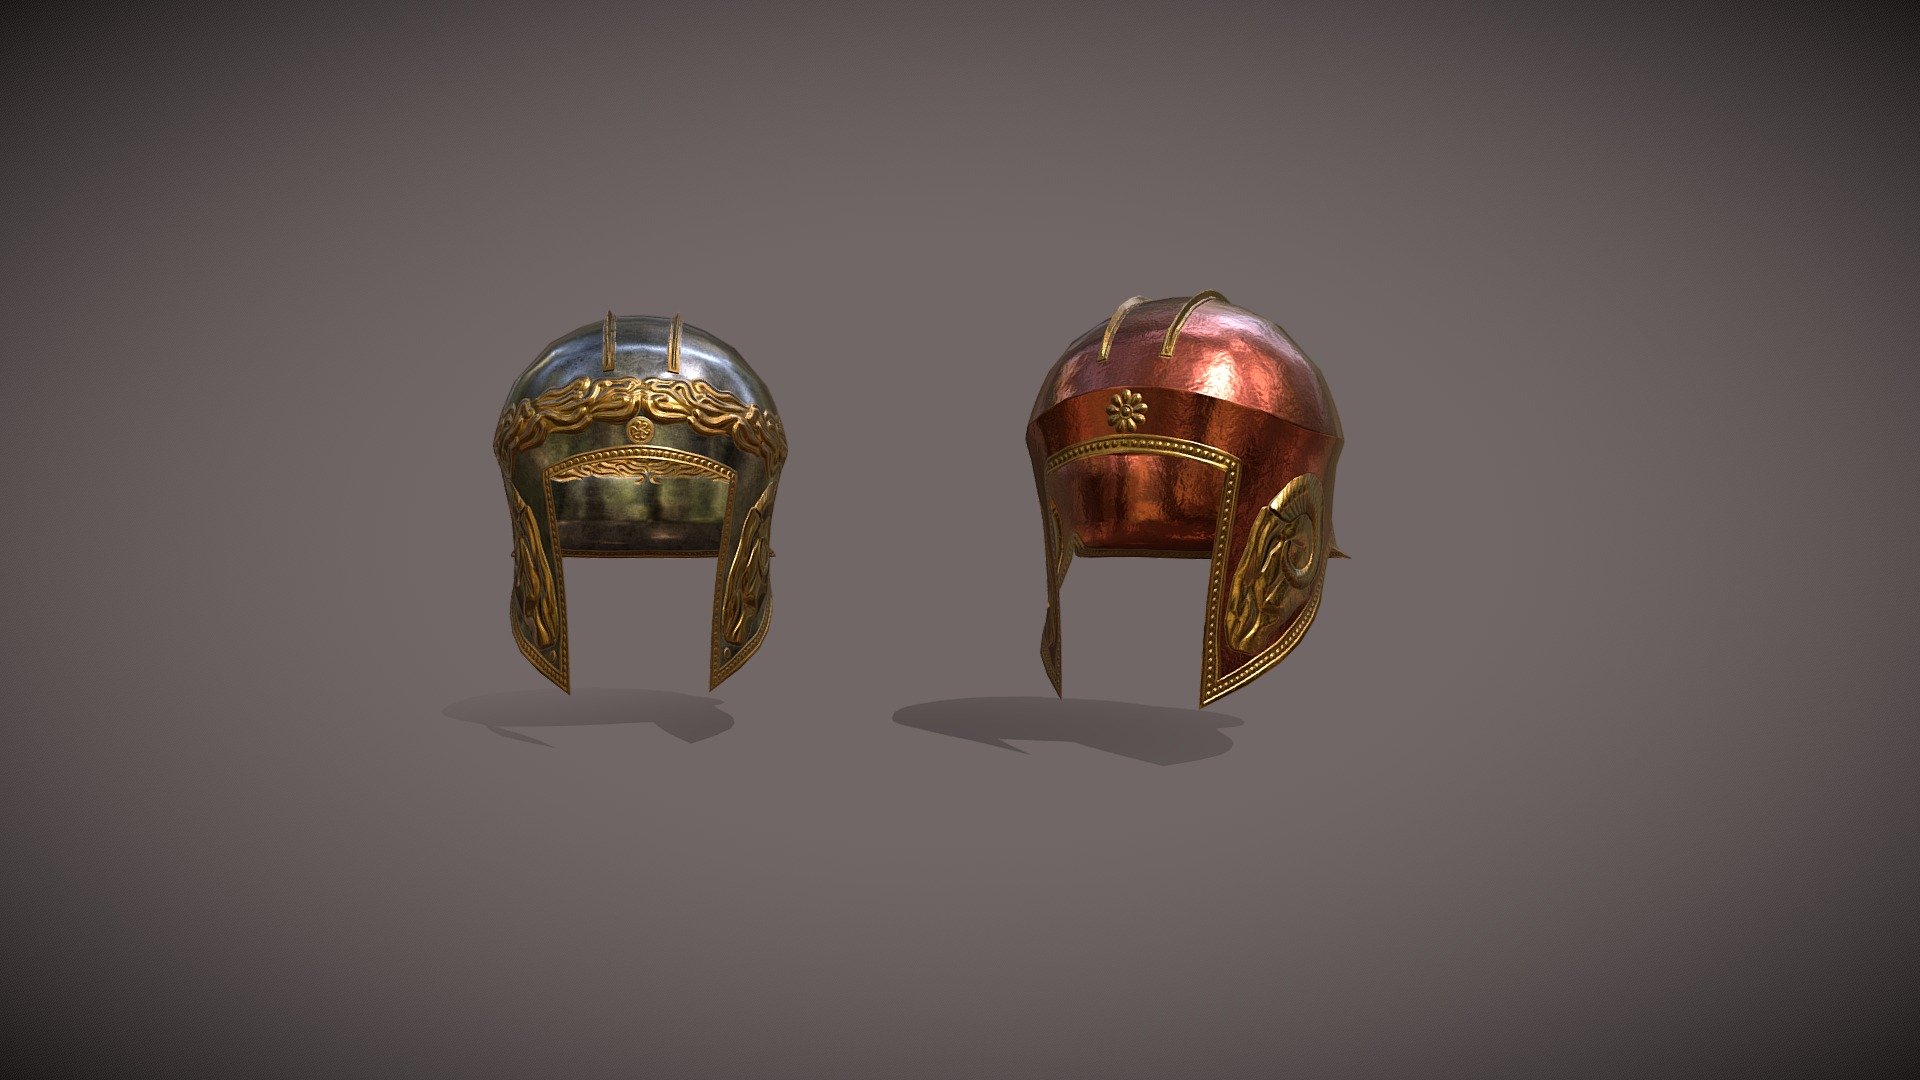 These are Illyrian helmets, which are noticeable for having accute cheekguards and an overall shape that nearly covers all of the head. Additionally, there's the detail of the helmet always being open in the front.

Made for the RTR: Imperium Surrectum mod, for the game Rome Total War Remastered.

Made in Blender - 716 vertices each

The creative process is as follows: 
- a low poly model is made.
- a copy from the low poly is made and made high poly, via a subdivision modifier and a multi-res (not applied), which brings the mesh to over 10 million vertices. This is to ensure detail precision.
- Details are sculpted onto the high poly mesh
- Detail work is baked from high to low poly mesh
- Any colour work is done in texturepaint.

Some minor steps have been learned since the previous upload, namely the simple addition of SubD mod to the high poly mesh before working with the multires, or sculpting metal roughness to give the model more character 3d model